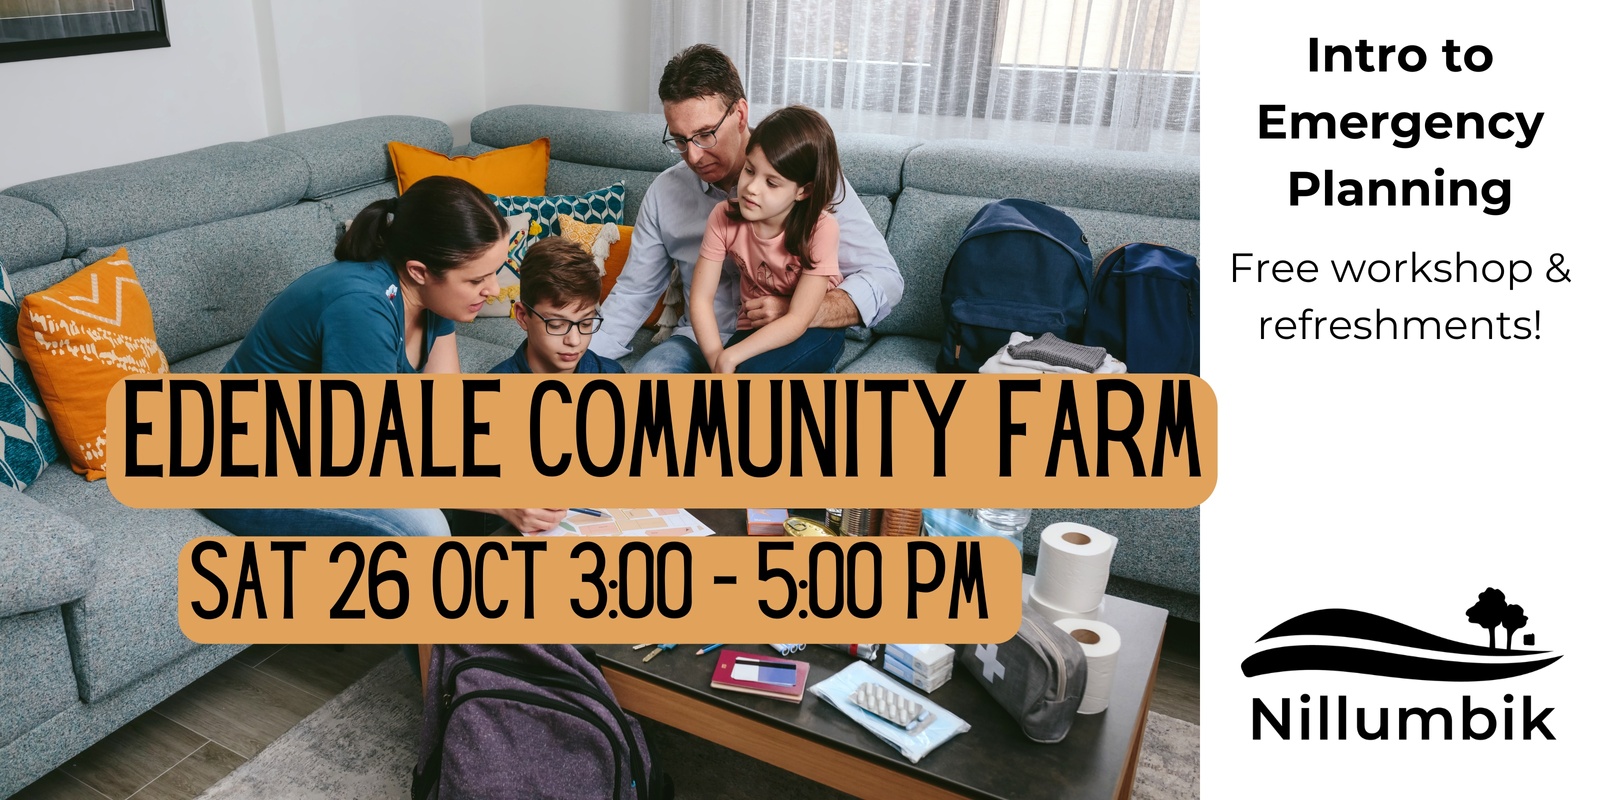 Banner image for Intro to Emergency Planning Workshop - Edendale Community Farm